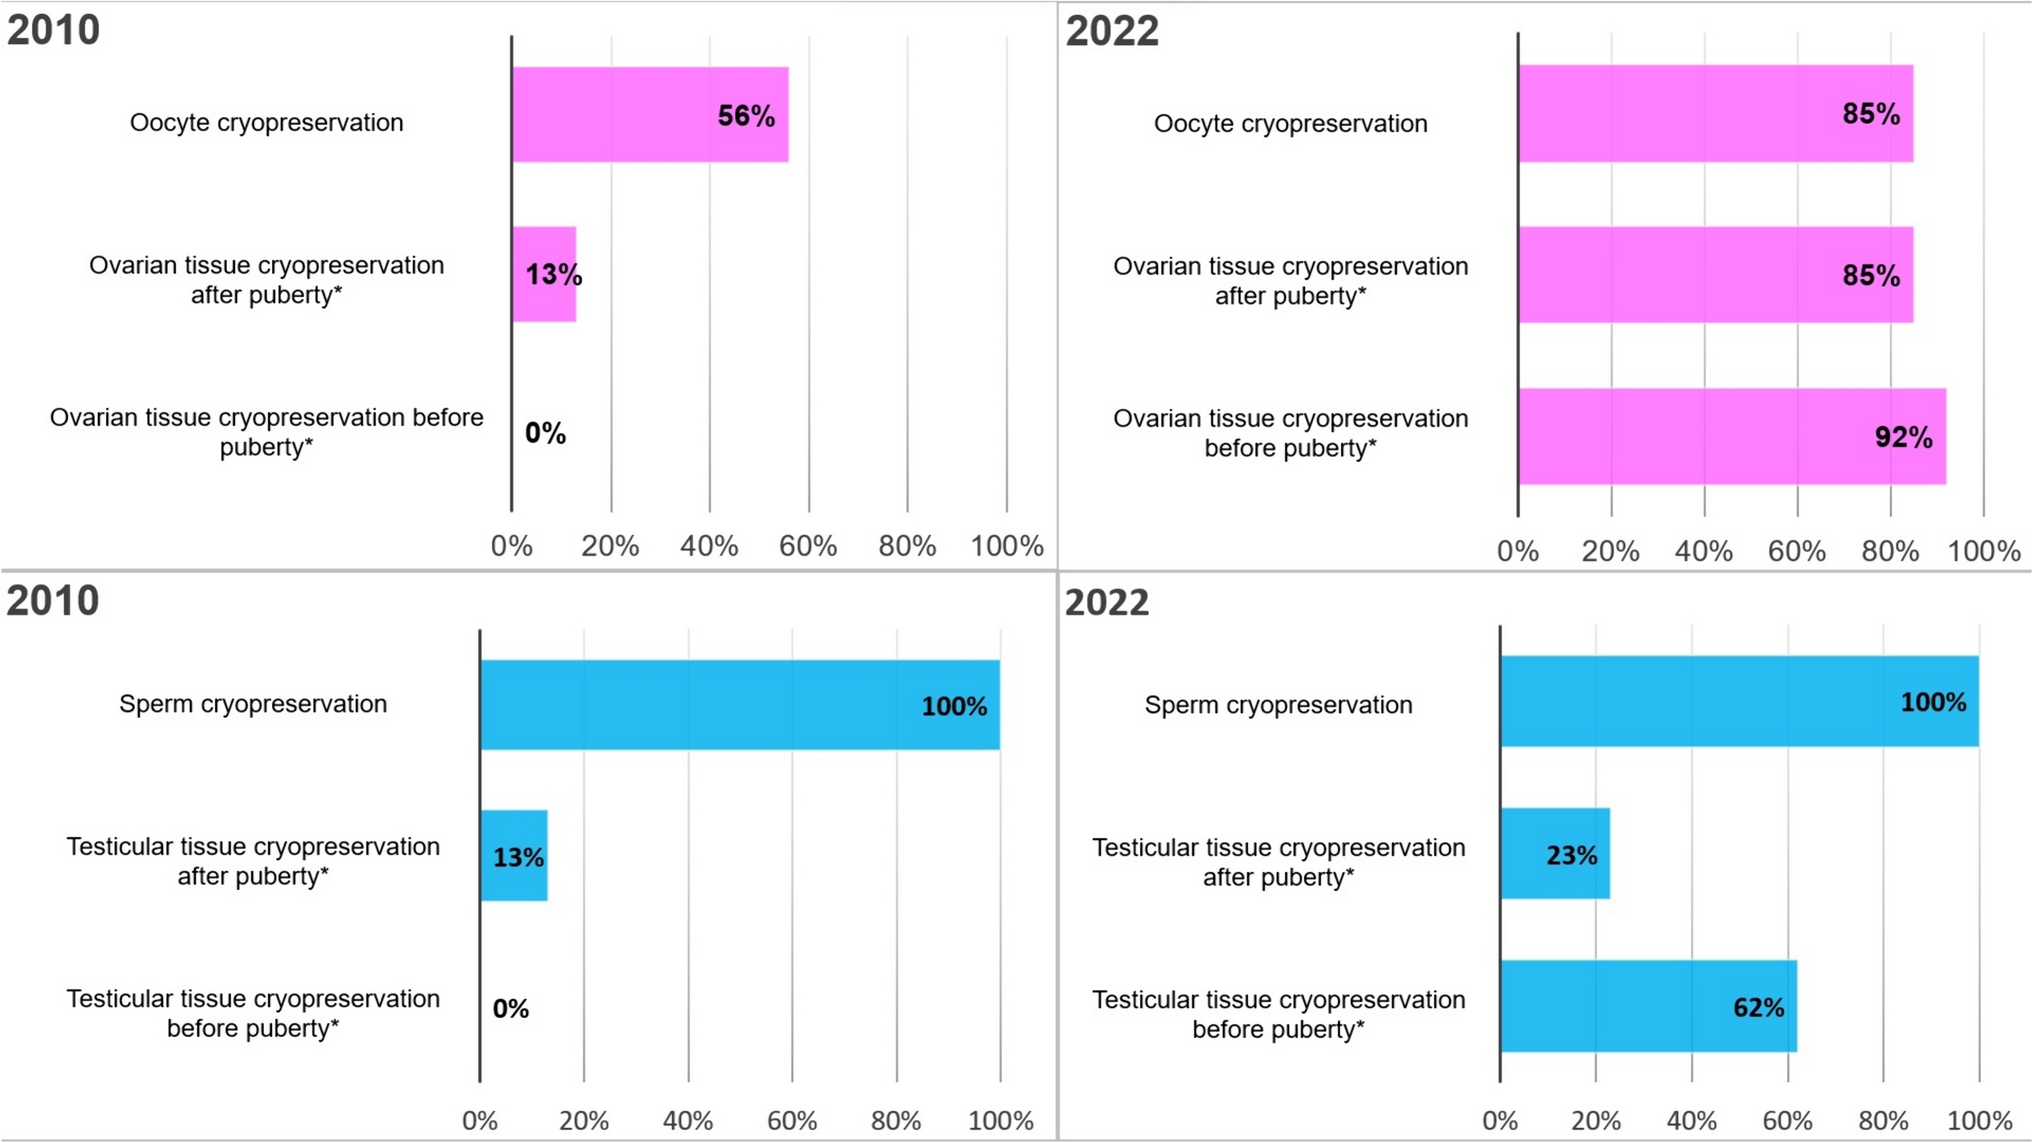 A 12-year overview of fertility preservation practice in Nordic pediatric oncology centers